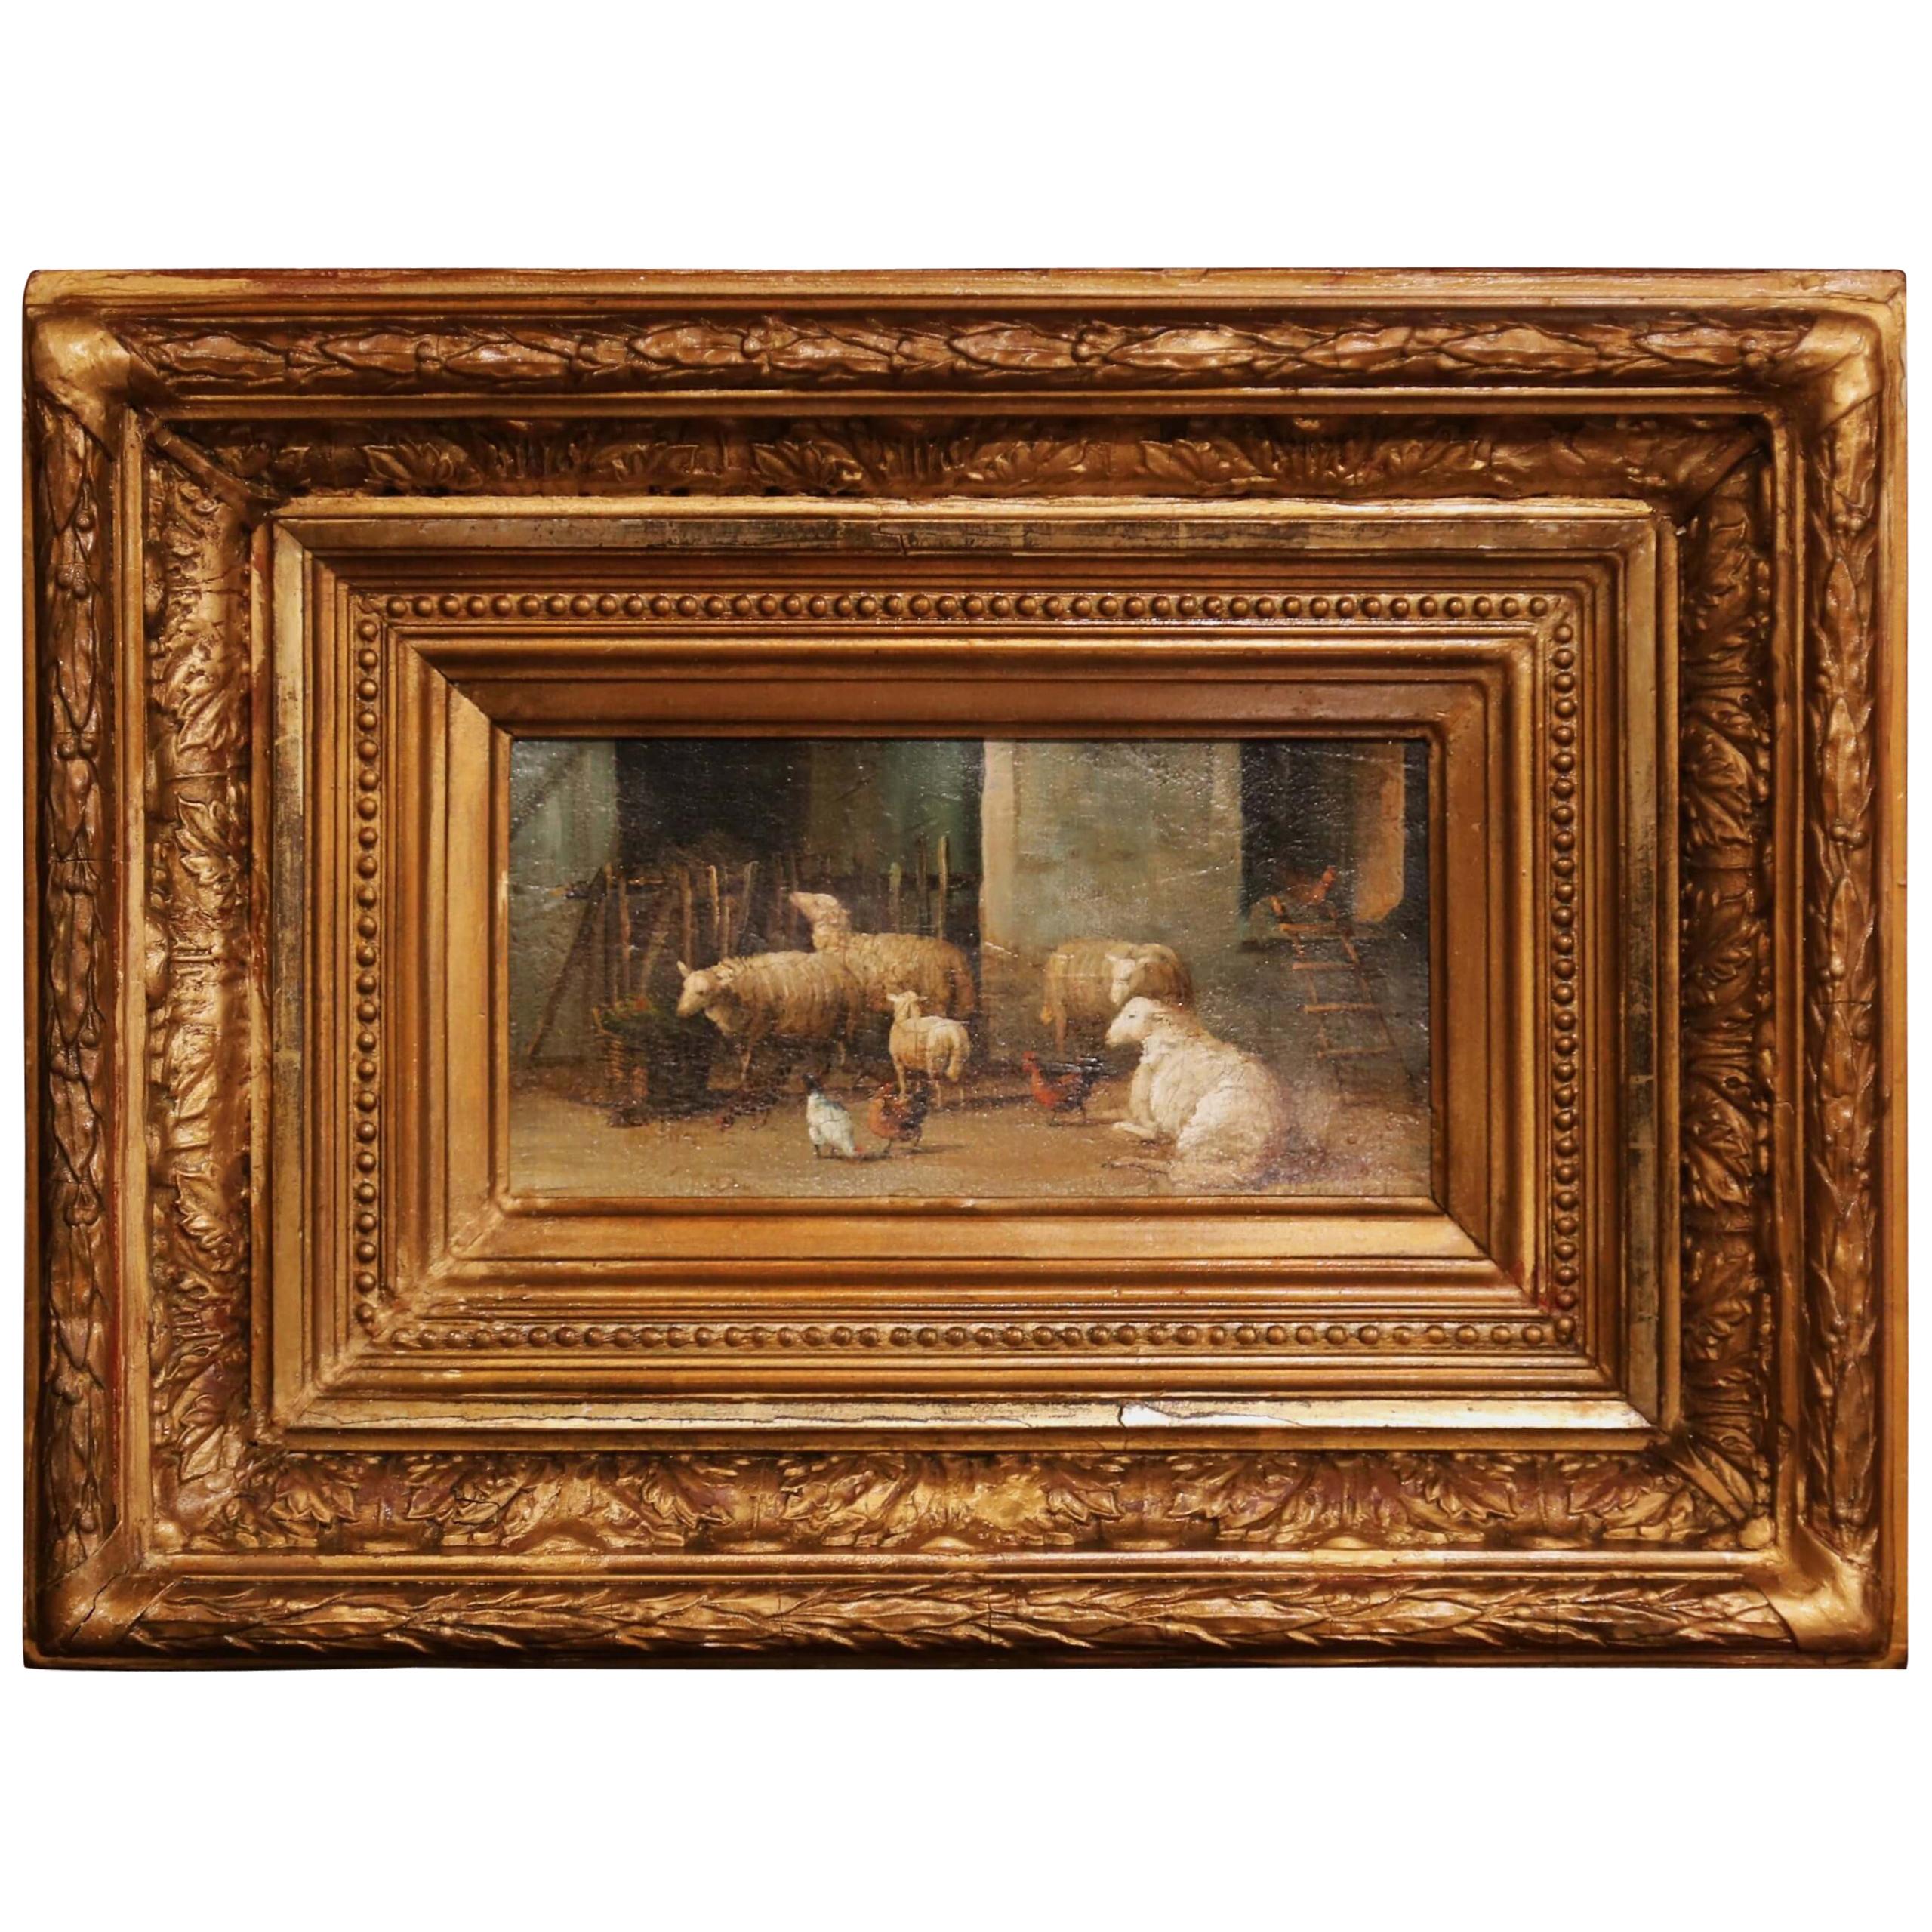 19th Century Sheep Painting in Carved Giltwood Frame Signed J. Scholaerts